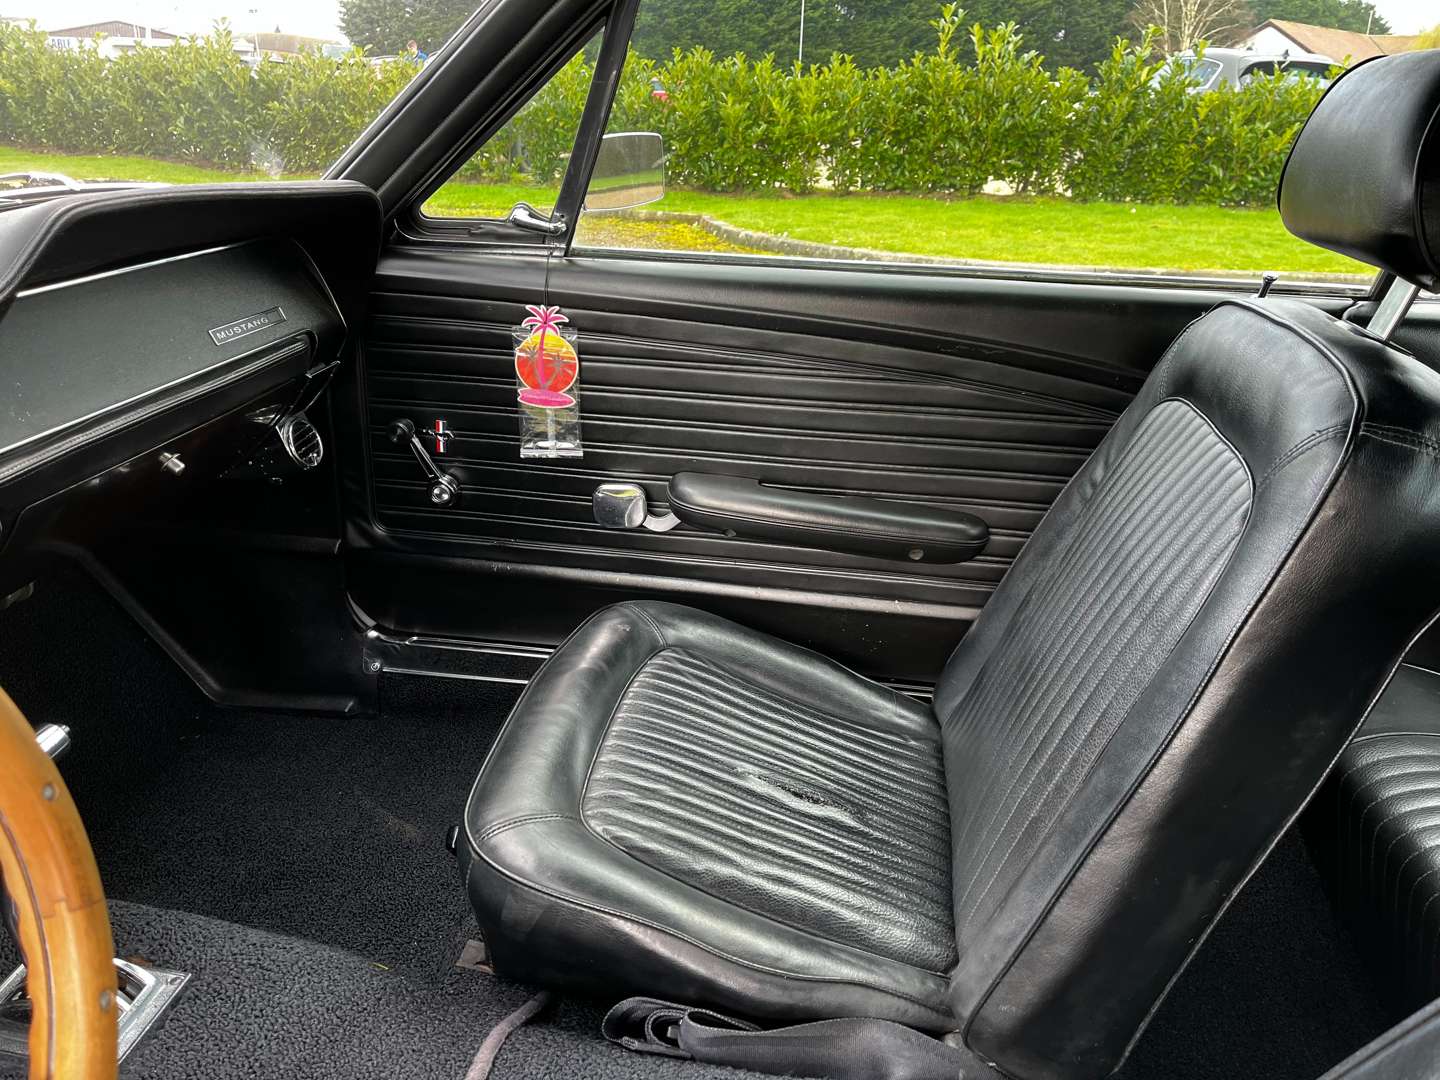 1968 FORD MUSTANG 5.0 V8 AUTO COUPE LHD - Image 21 of 29